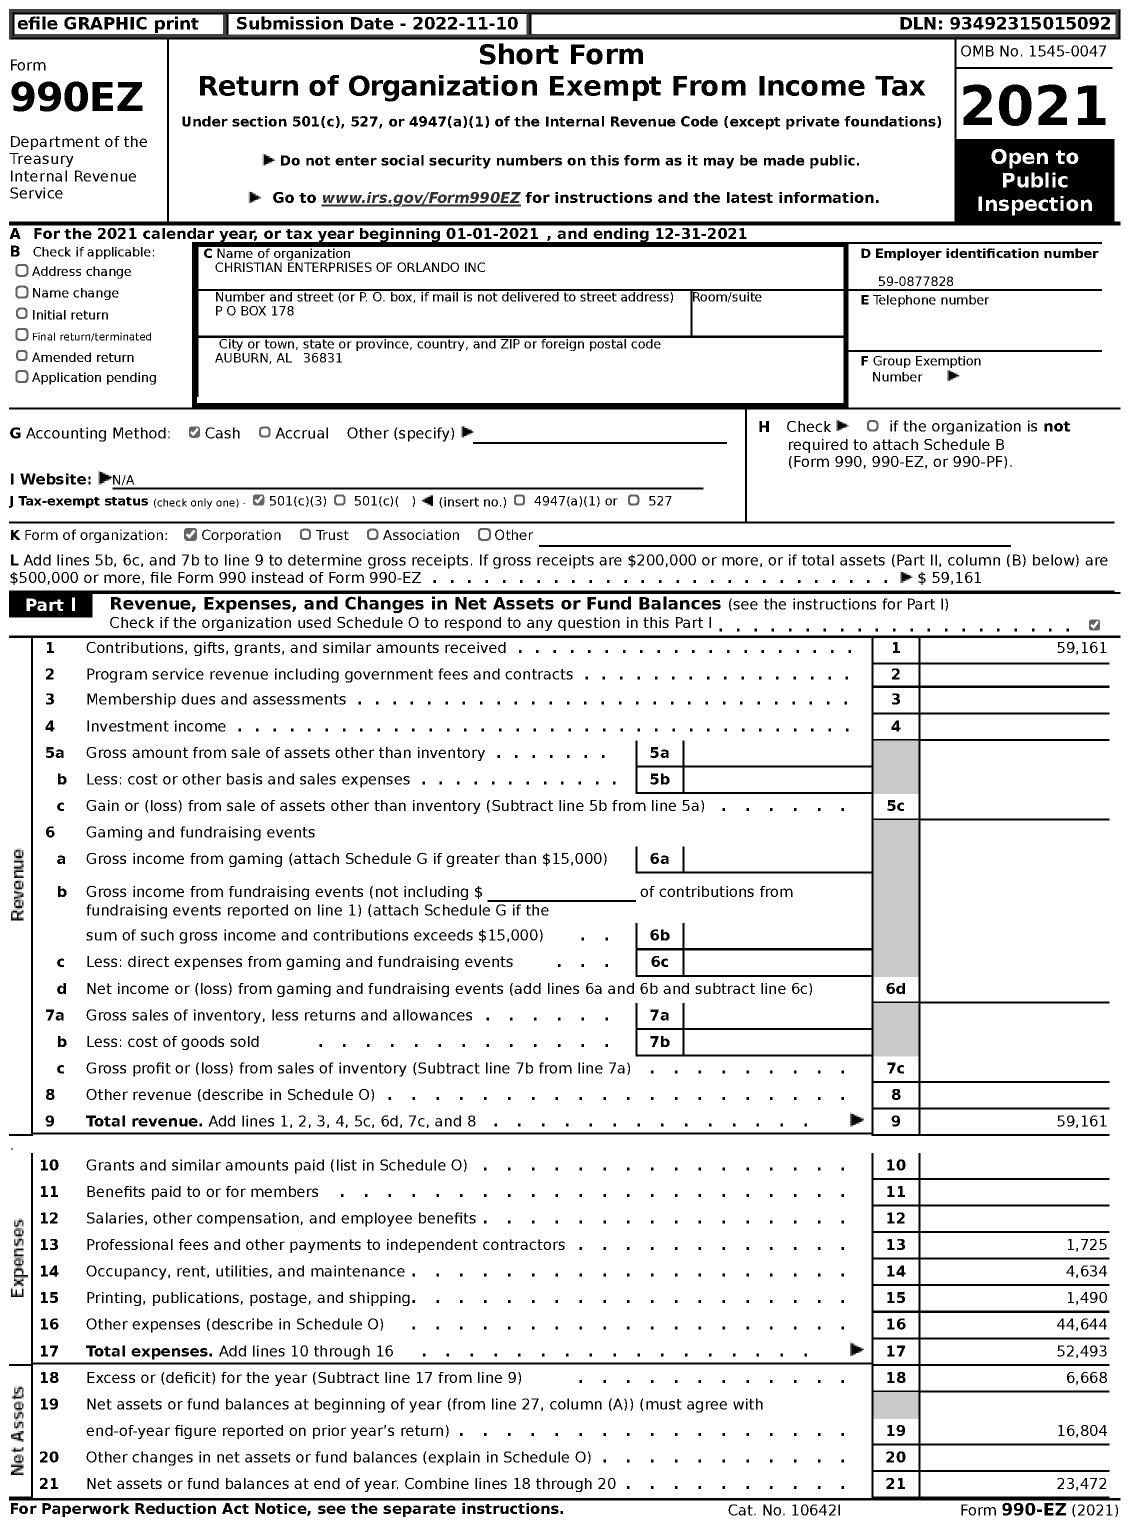 Image of first page of 2021 Form 990EZ for Christian Enterprises of Orlando